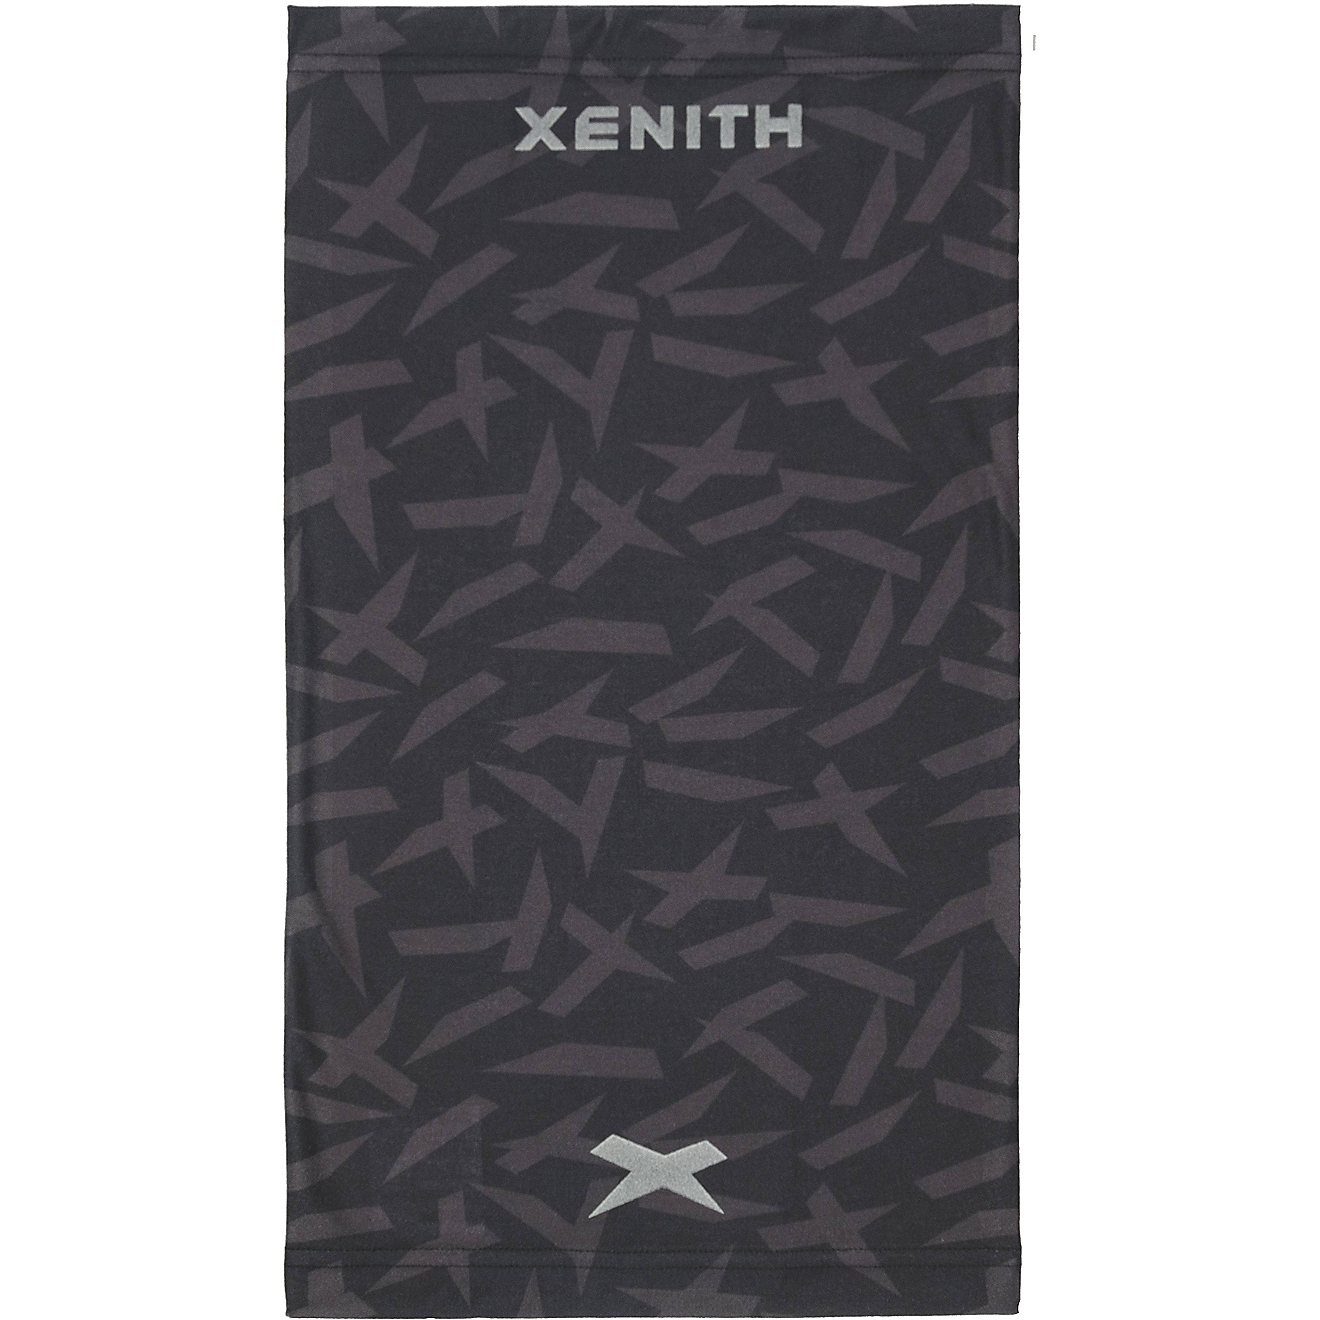 Xenith X-Camo Neck Gaiter                                                                                                        - view number 3